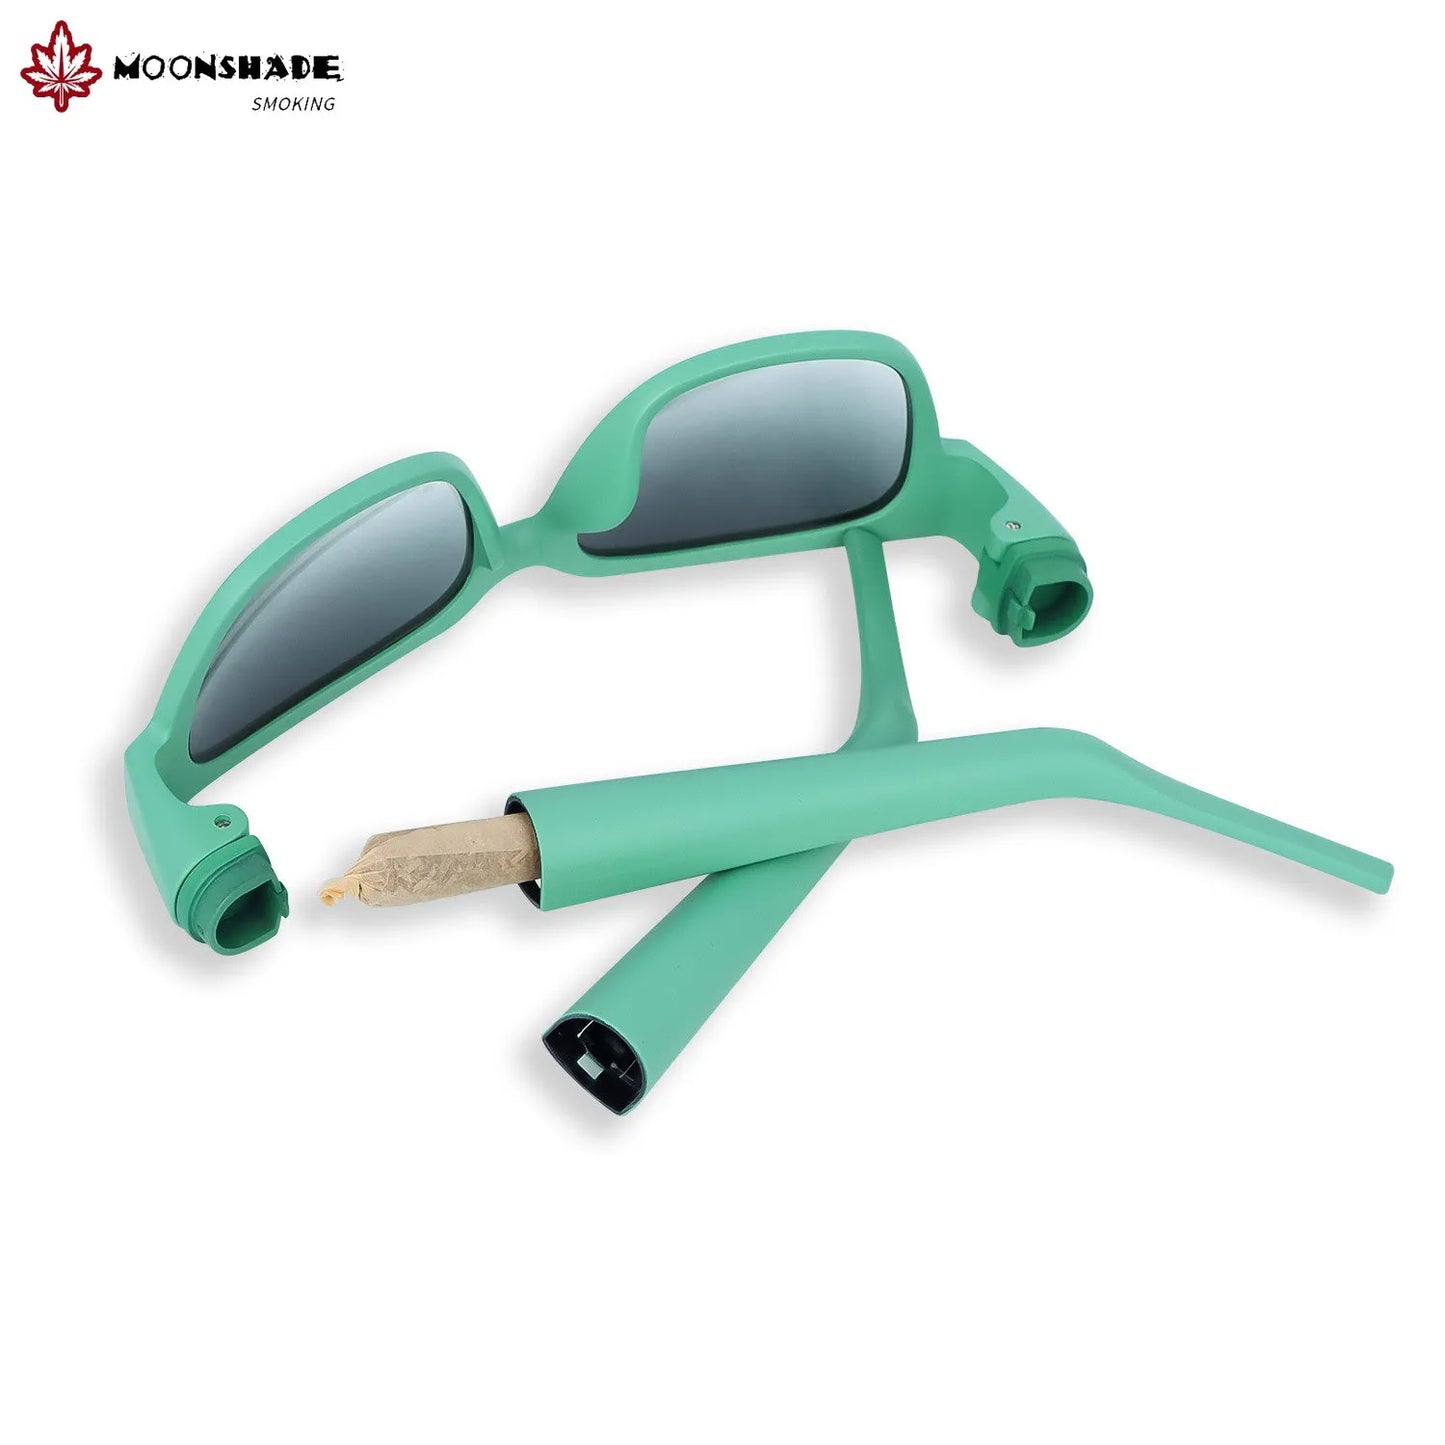 Moonshade Sunglasses With Hidden Storage Tube Compartment